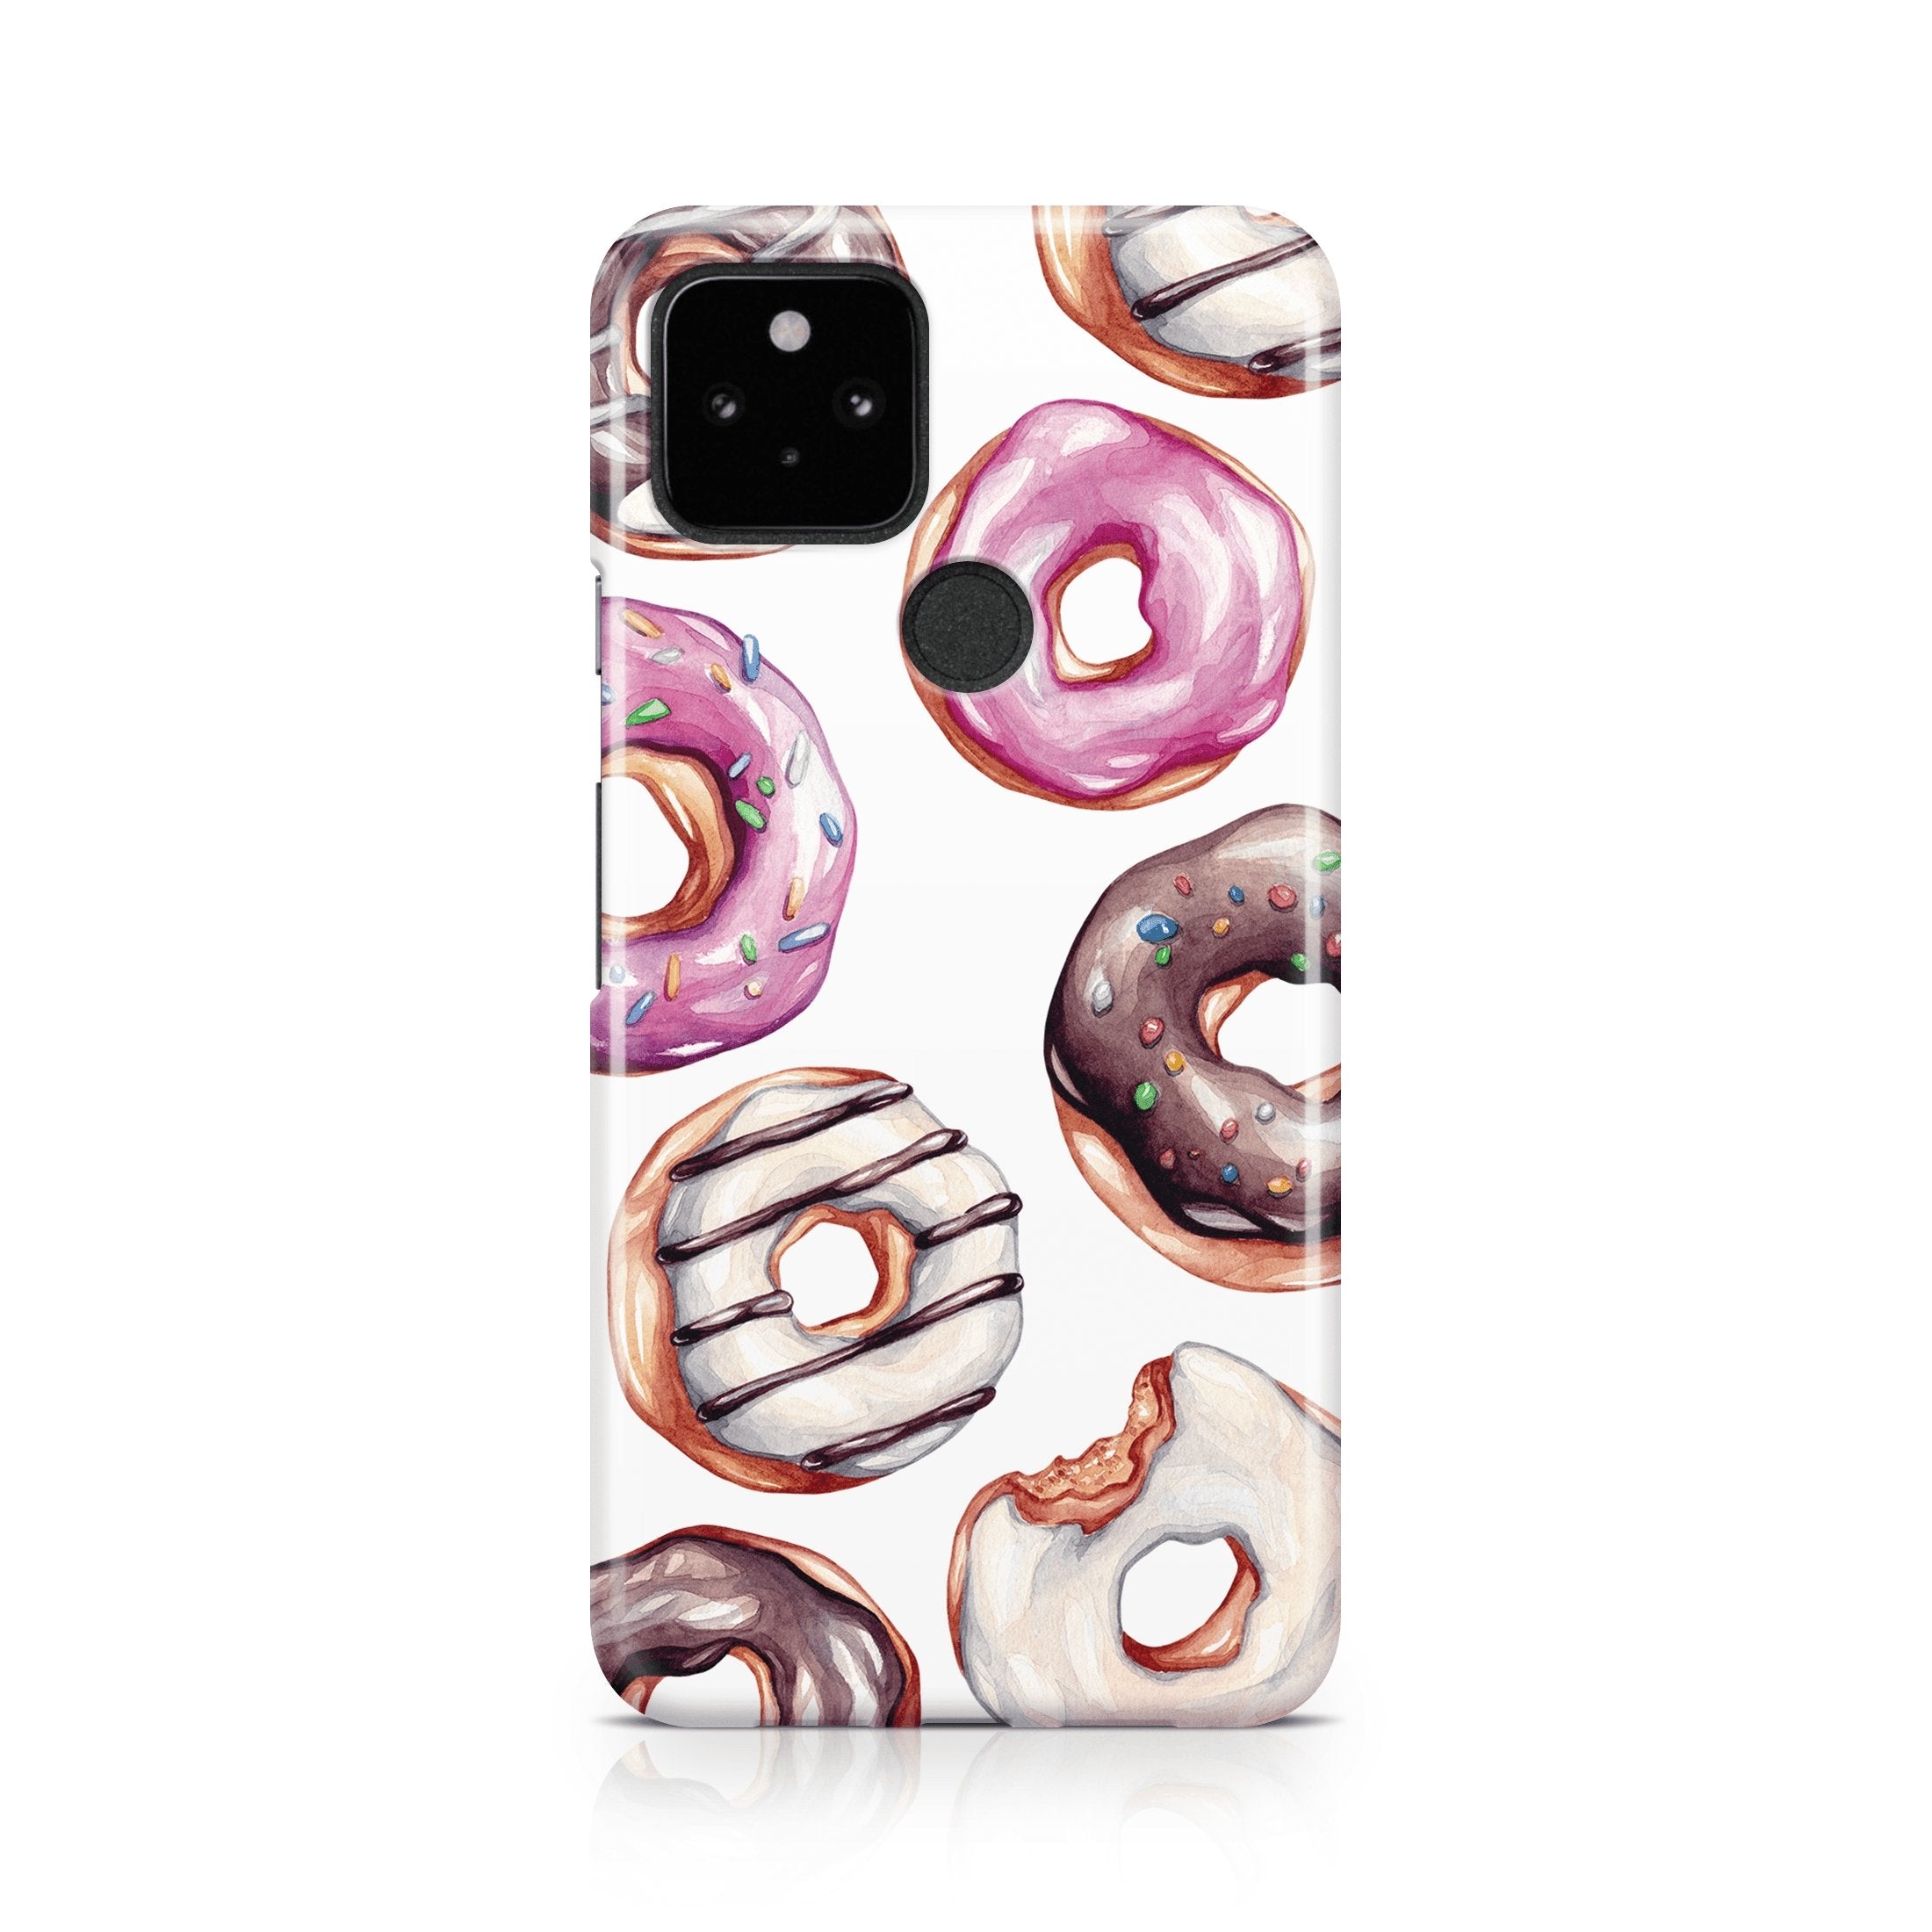 Donuts - Google phone case designs by CaseSwagger